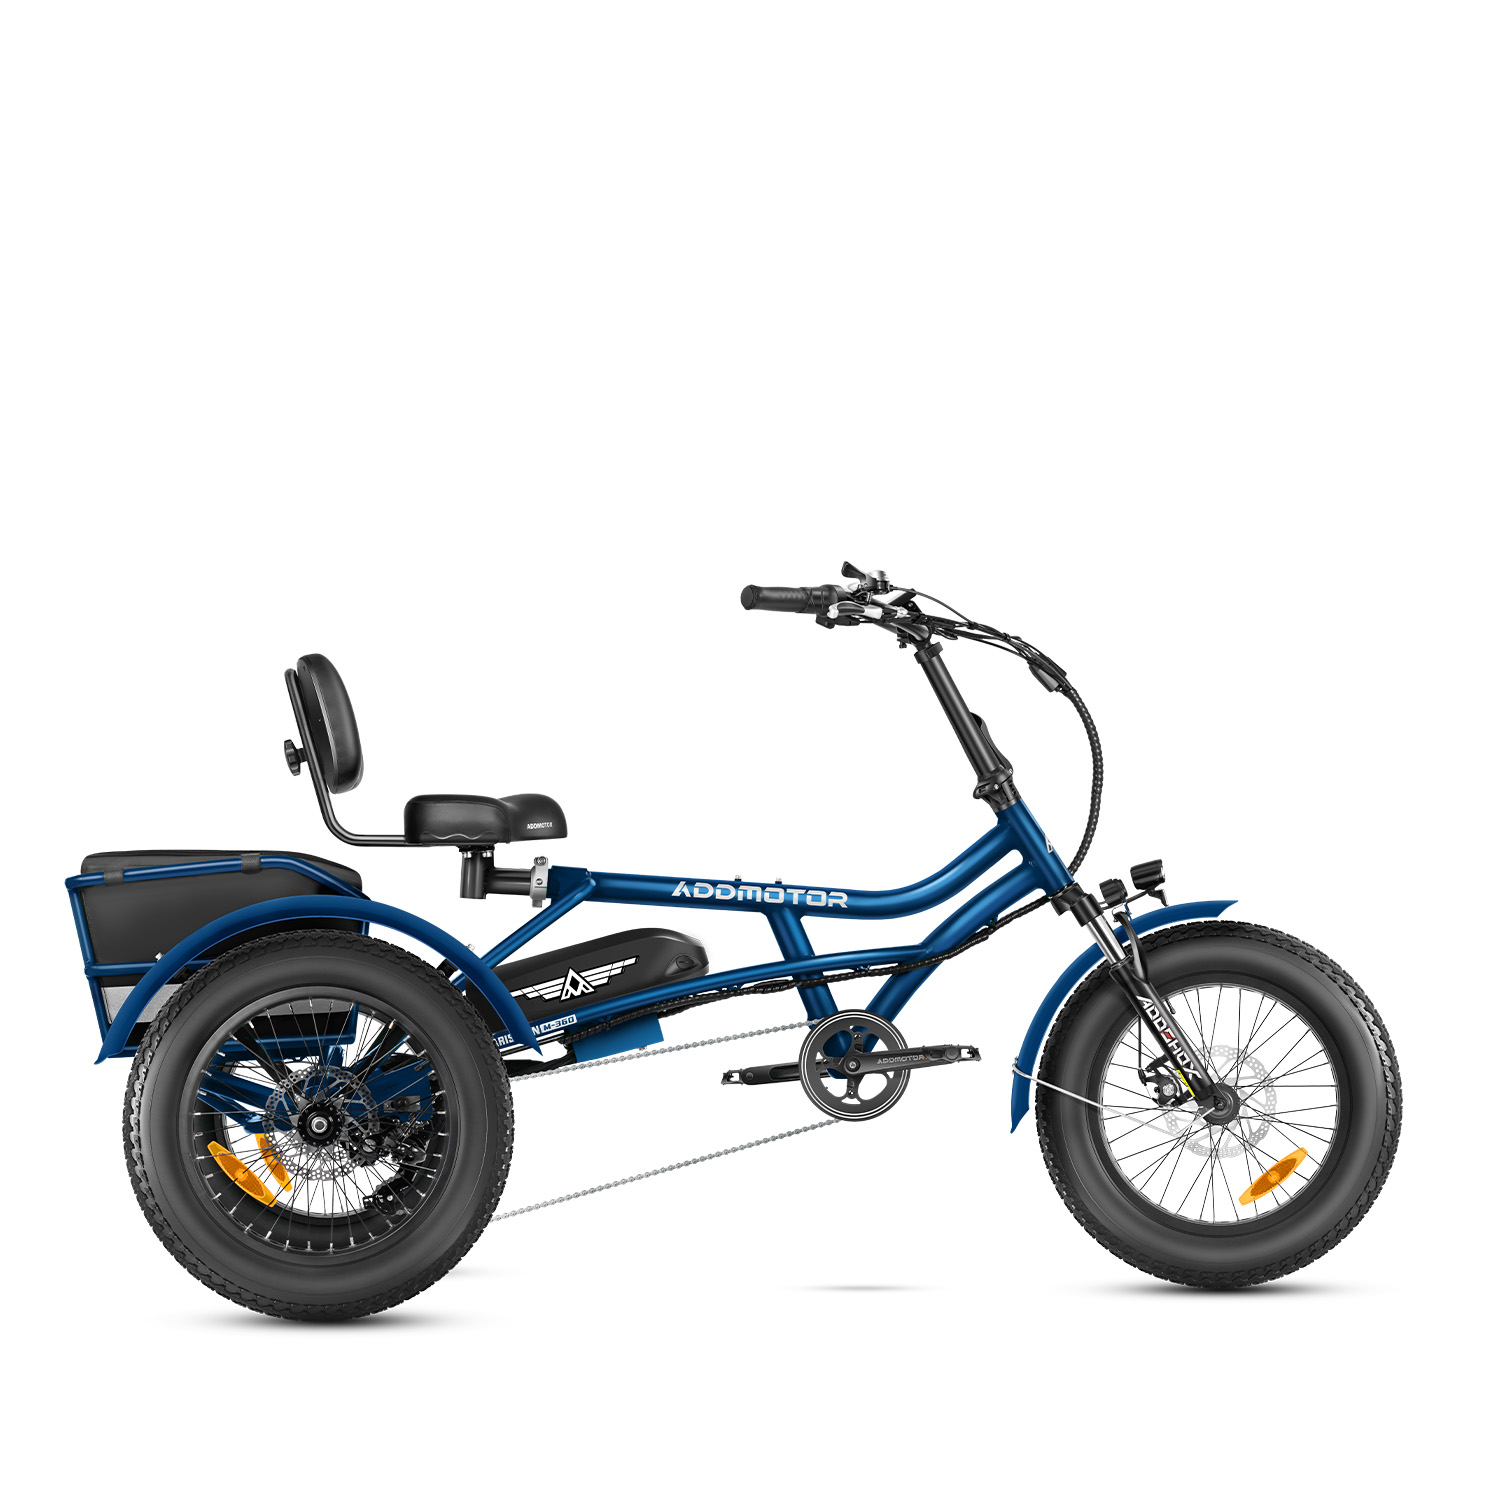 Addmotor Arisetan M-360 Mini Trike | Adult Semi-recumbent Electric Trike | Best Affordable Electric Tricycle with 750W Rear Motor | Blue